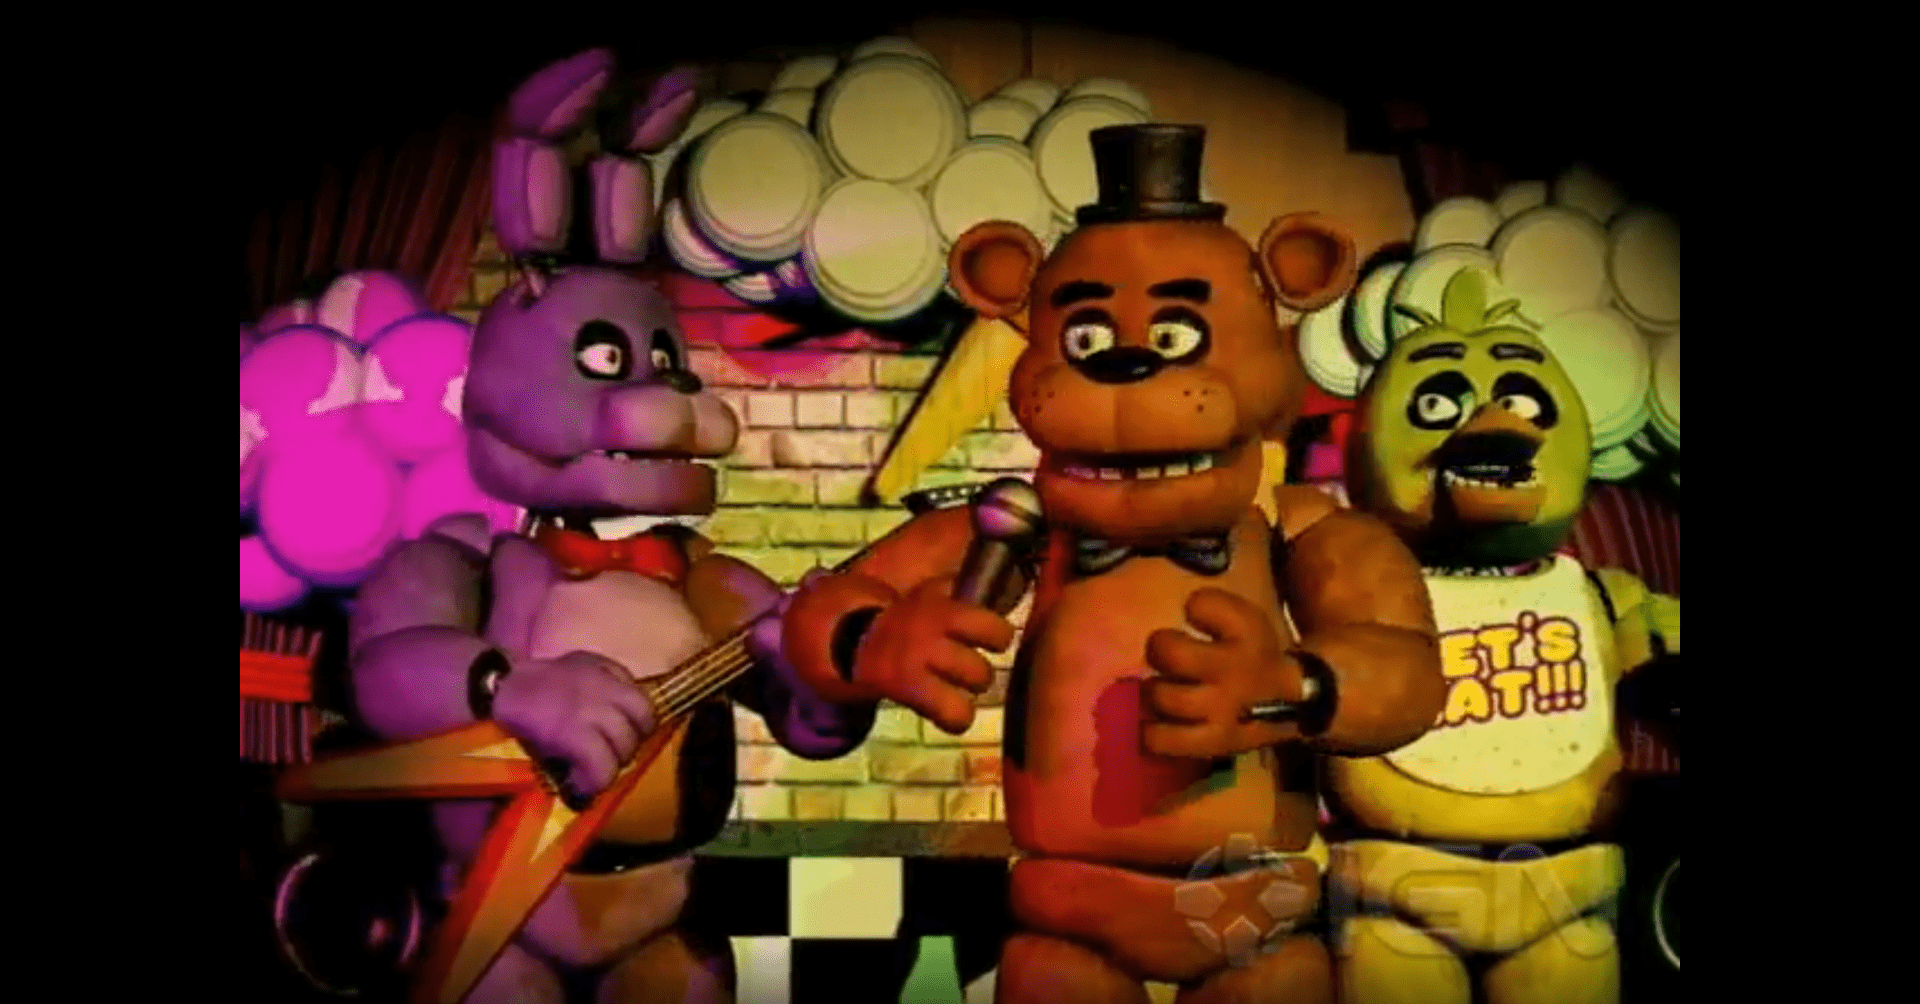 Five Nights at Freddys 2014 game